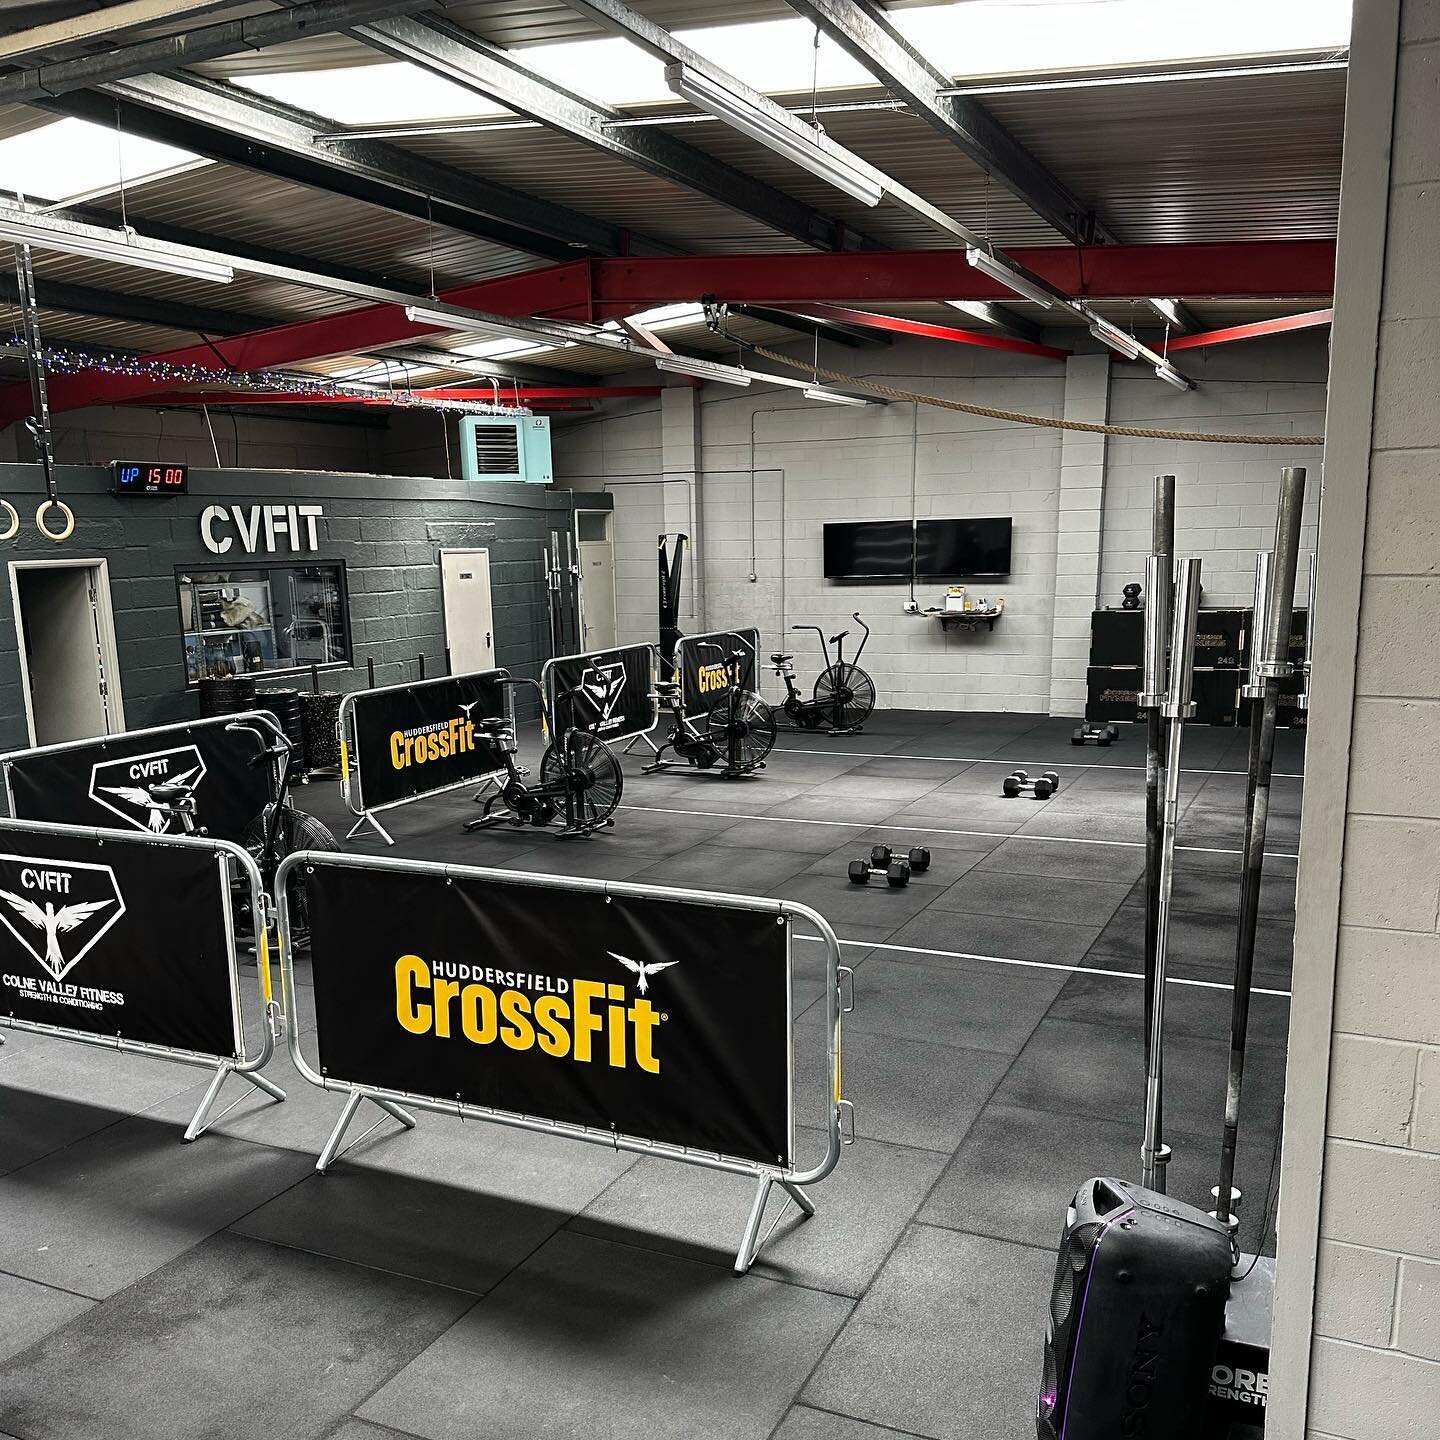 We are ready! Are you?????

#crossfitcompetition #crossfit #crossfitcommunity #fitness #crossfitlife #crossfitgames #crossfitgirls #wod #crossfitcomp #crossfitter #functionalfitness #competition #fitnessmotivation #workout #crossfitathlete #weightlif